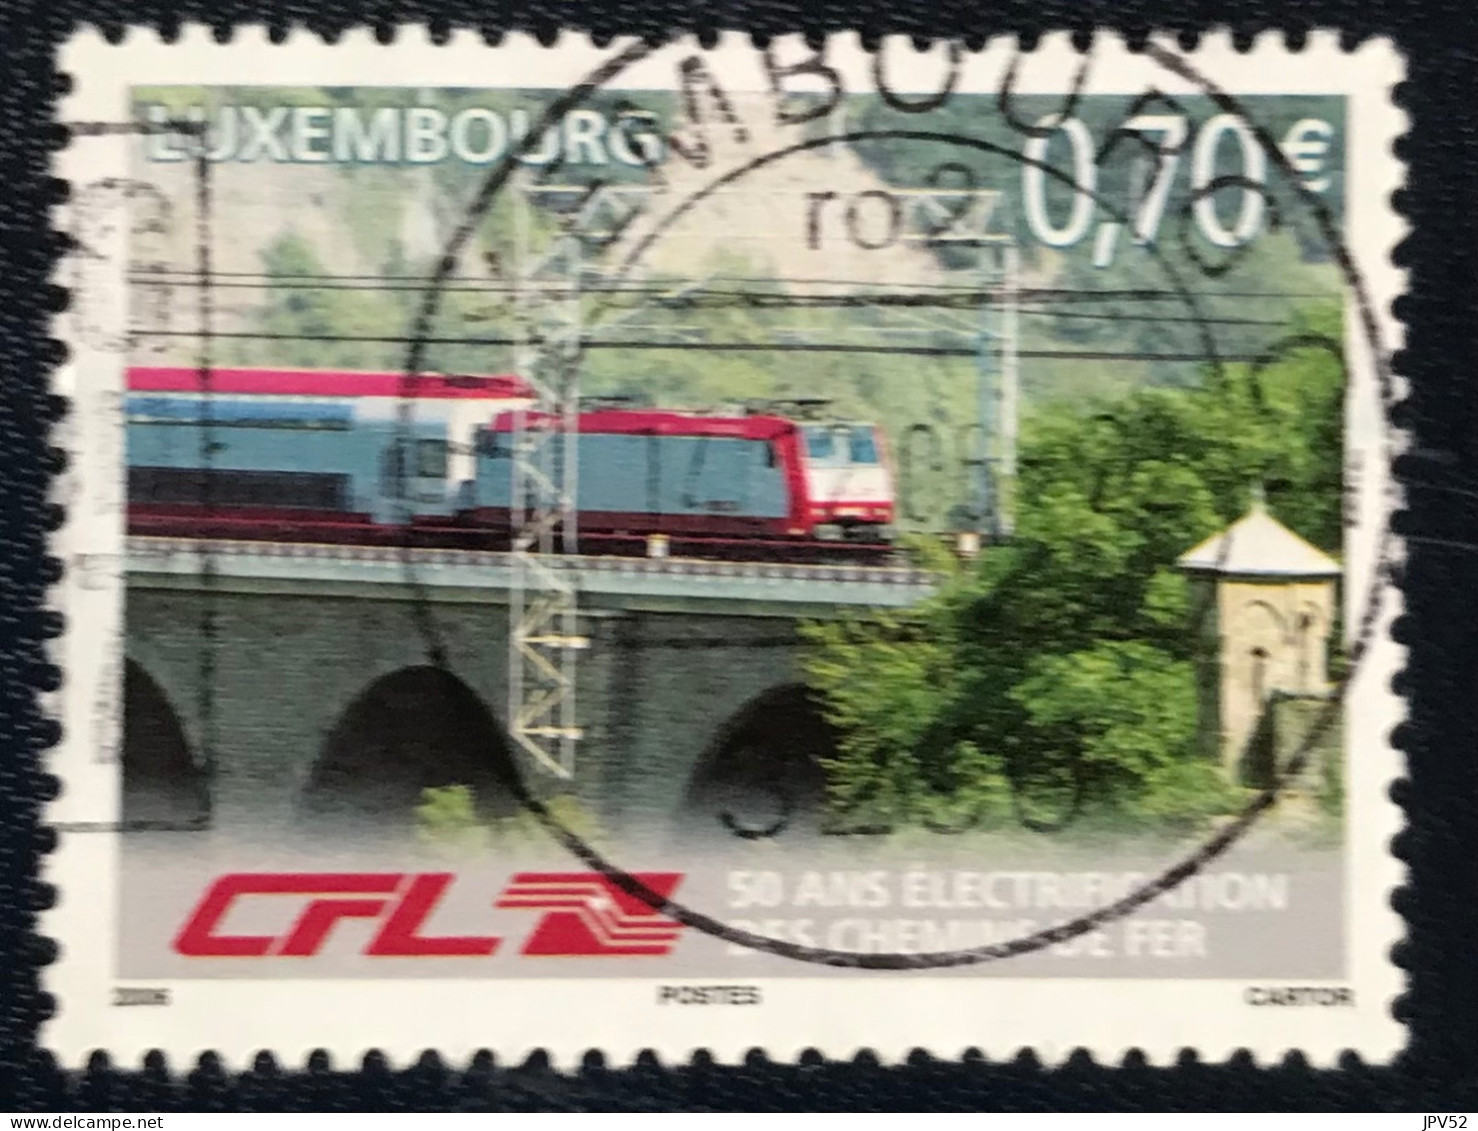 Luxembourg - Luxemburg - C18/29 - 2006 - (°)used - Michel 1705 - Electrificering Spoorwegnet - Usados